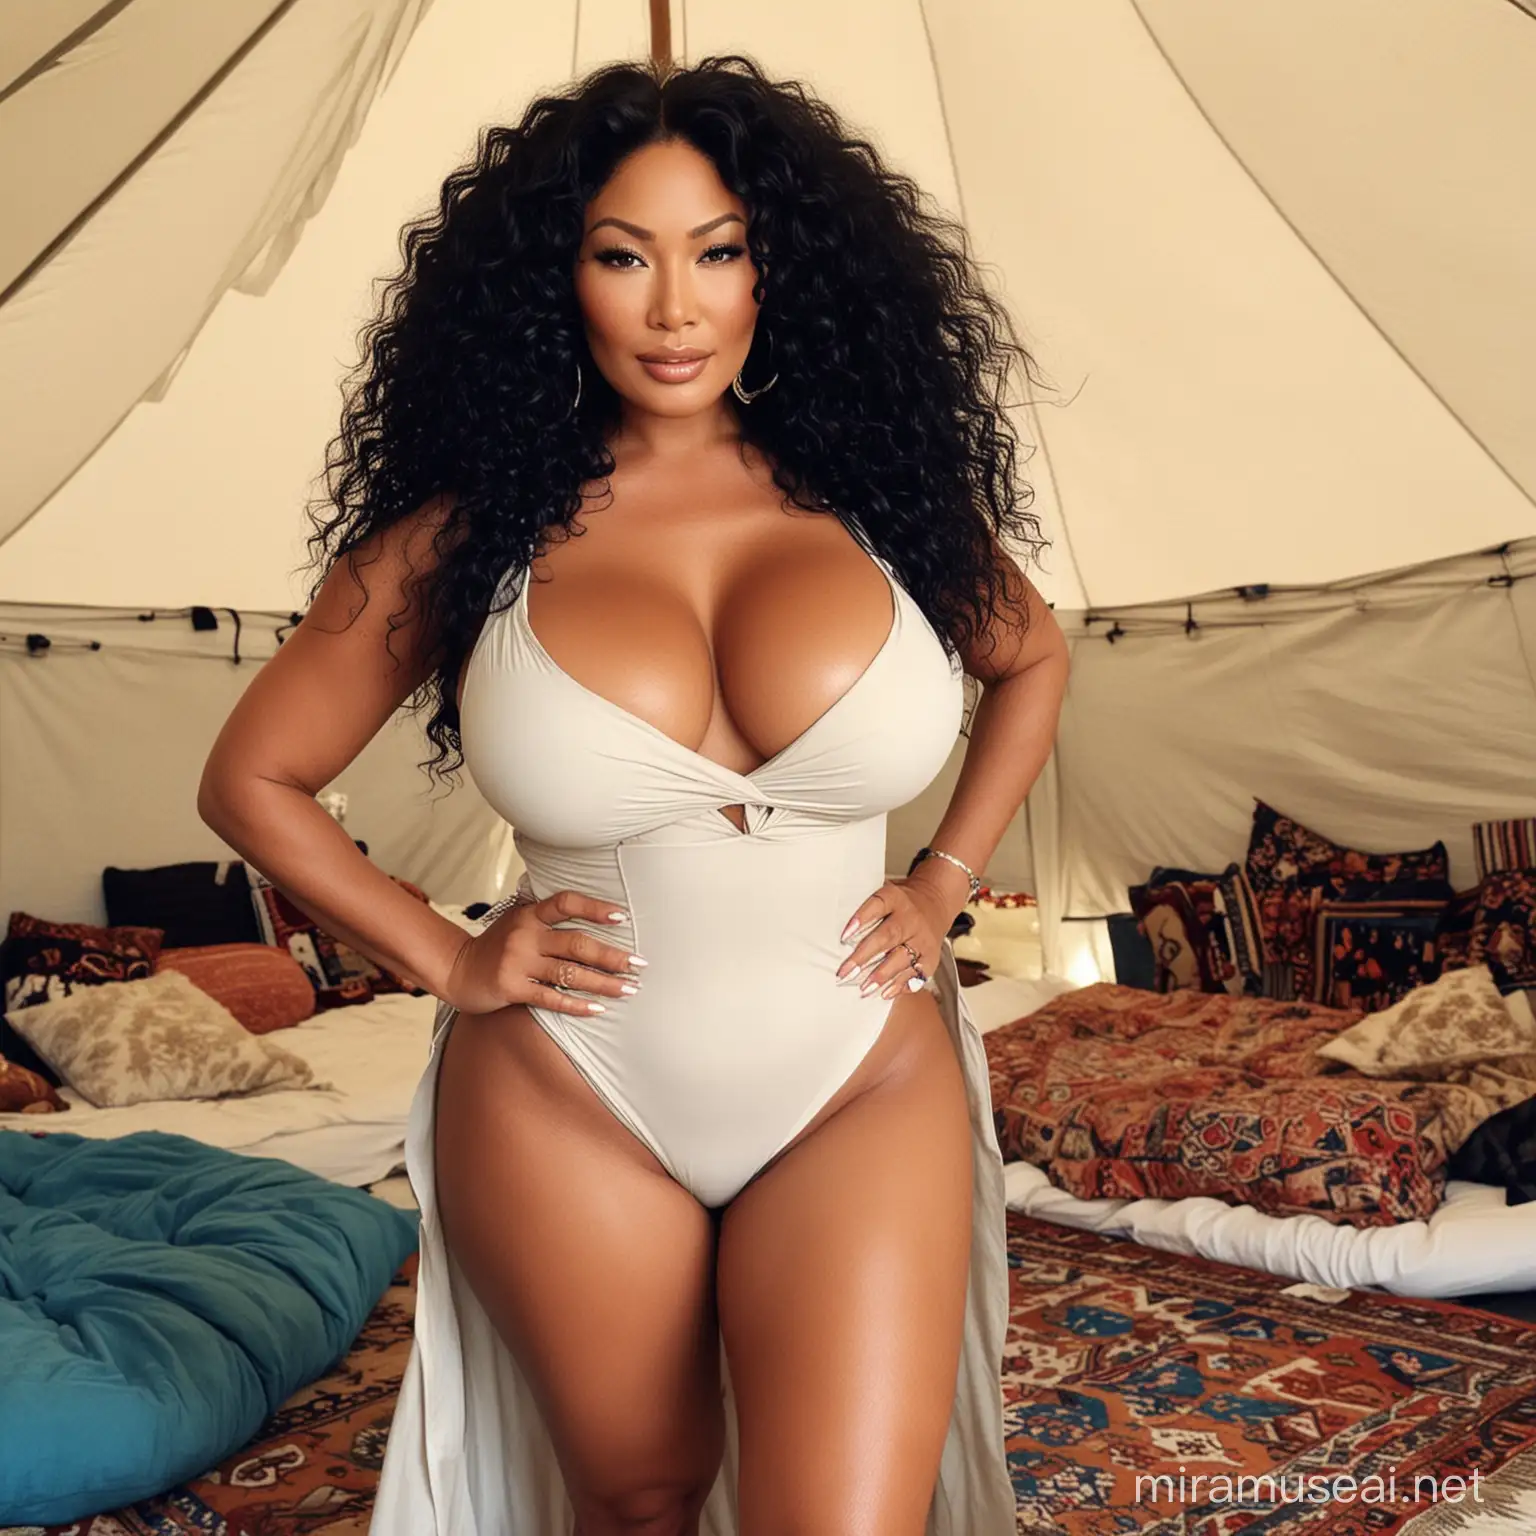 Kimora Lee Simmons Relaxing in Luxurious Tent with Curly Hair and Bold Curves